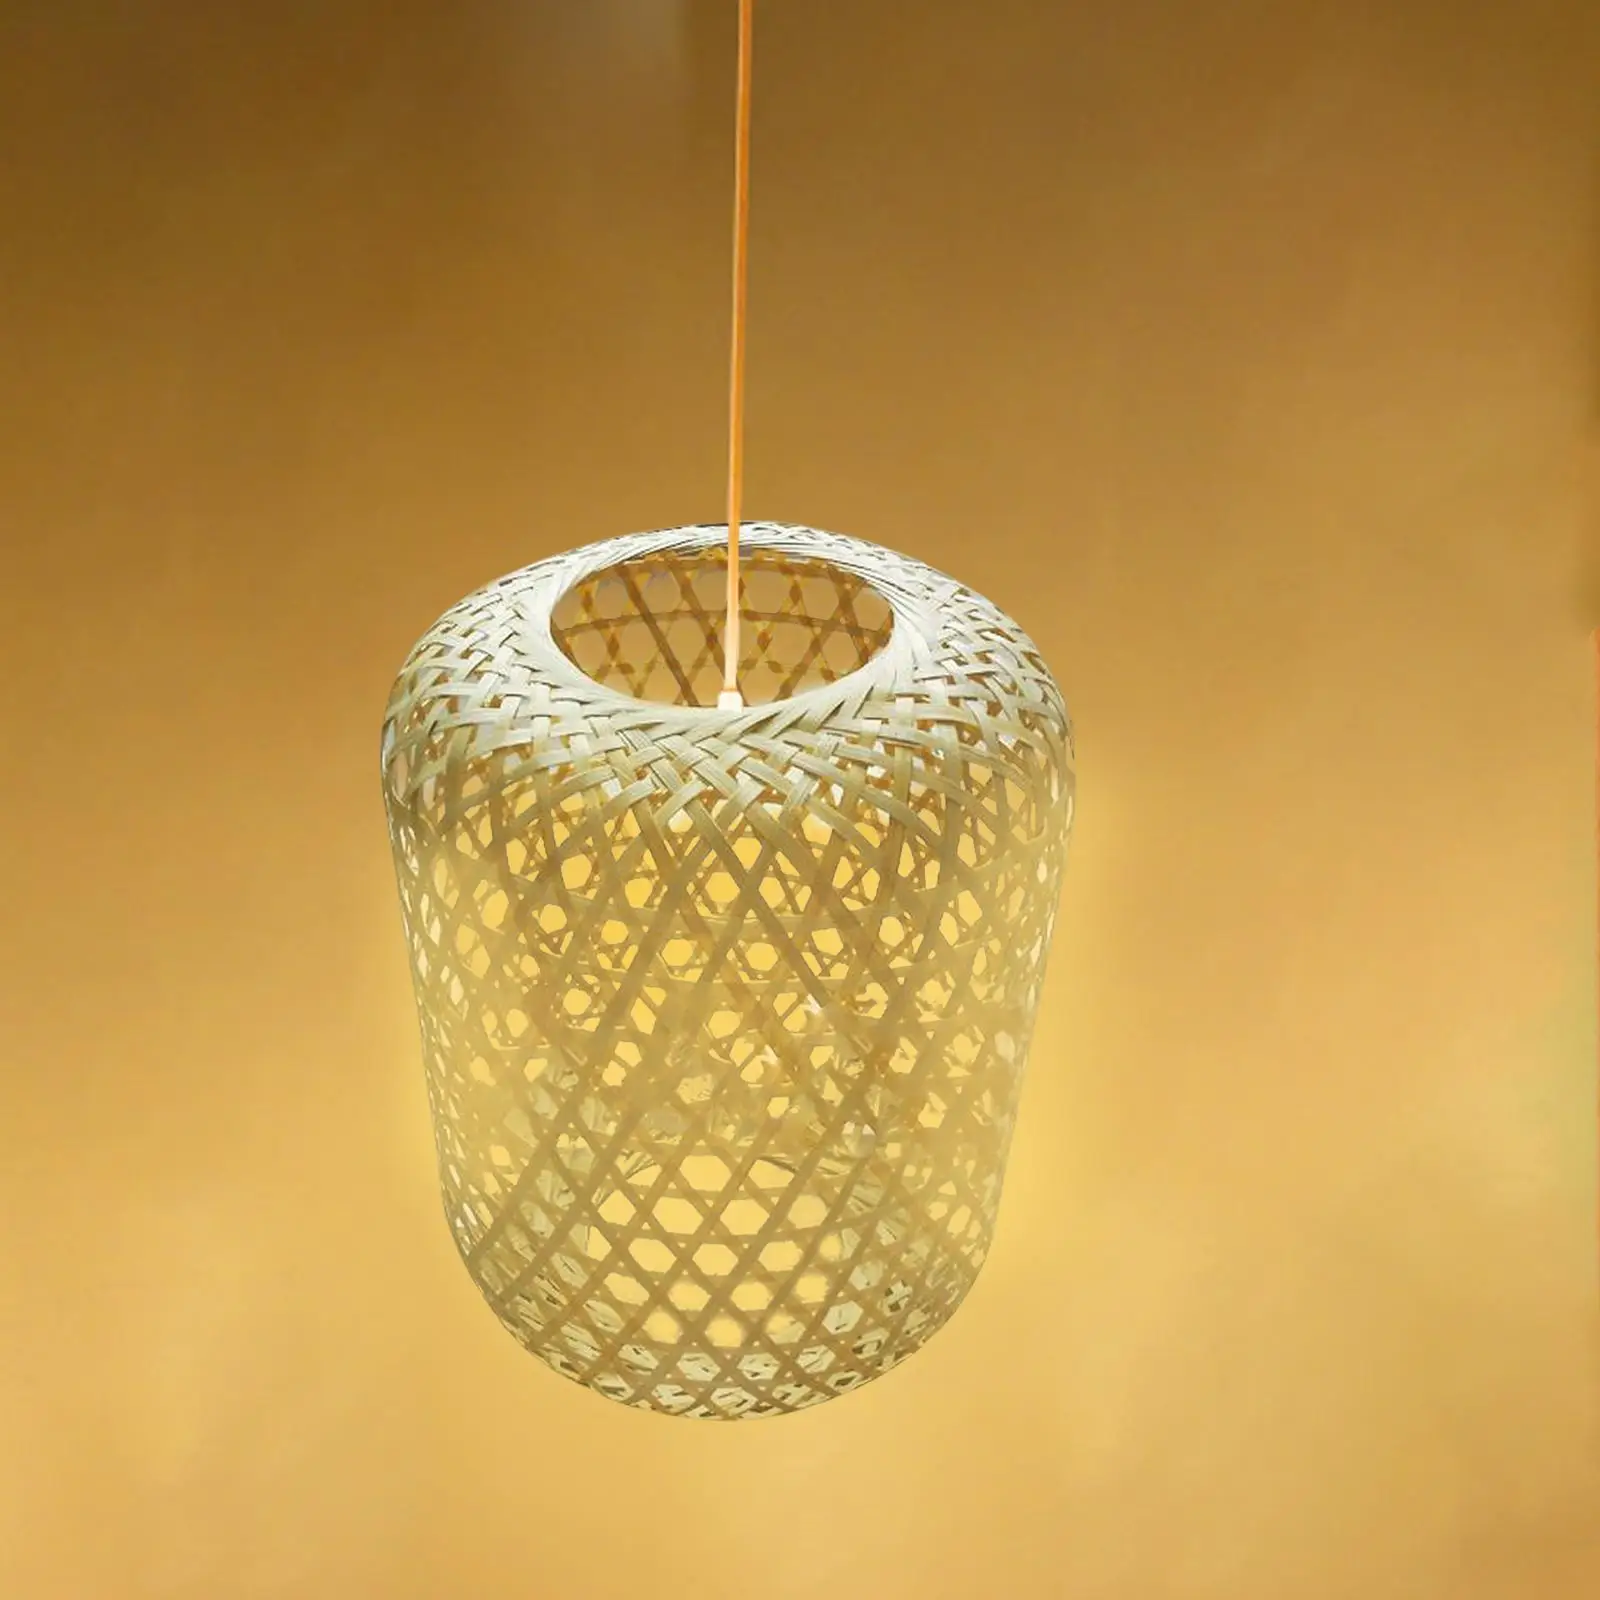 Bamboo Lamp Shade Ceiling Light Fixture Hanging Pendant Light Cover Lanterns Decoration Decorative Chandelier for Office Dorm